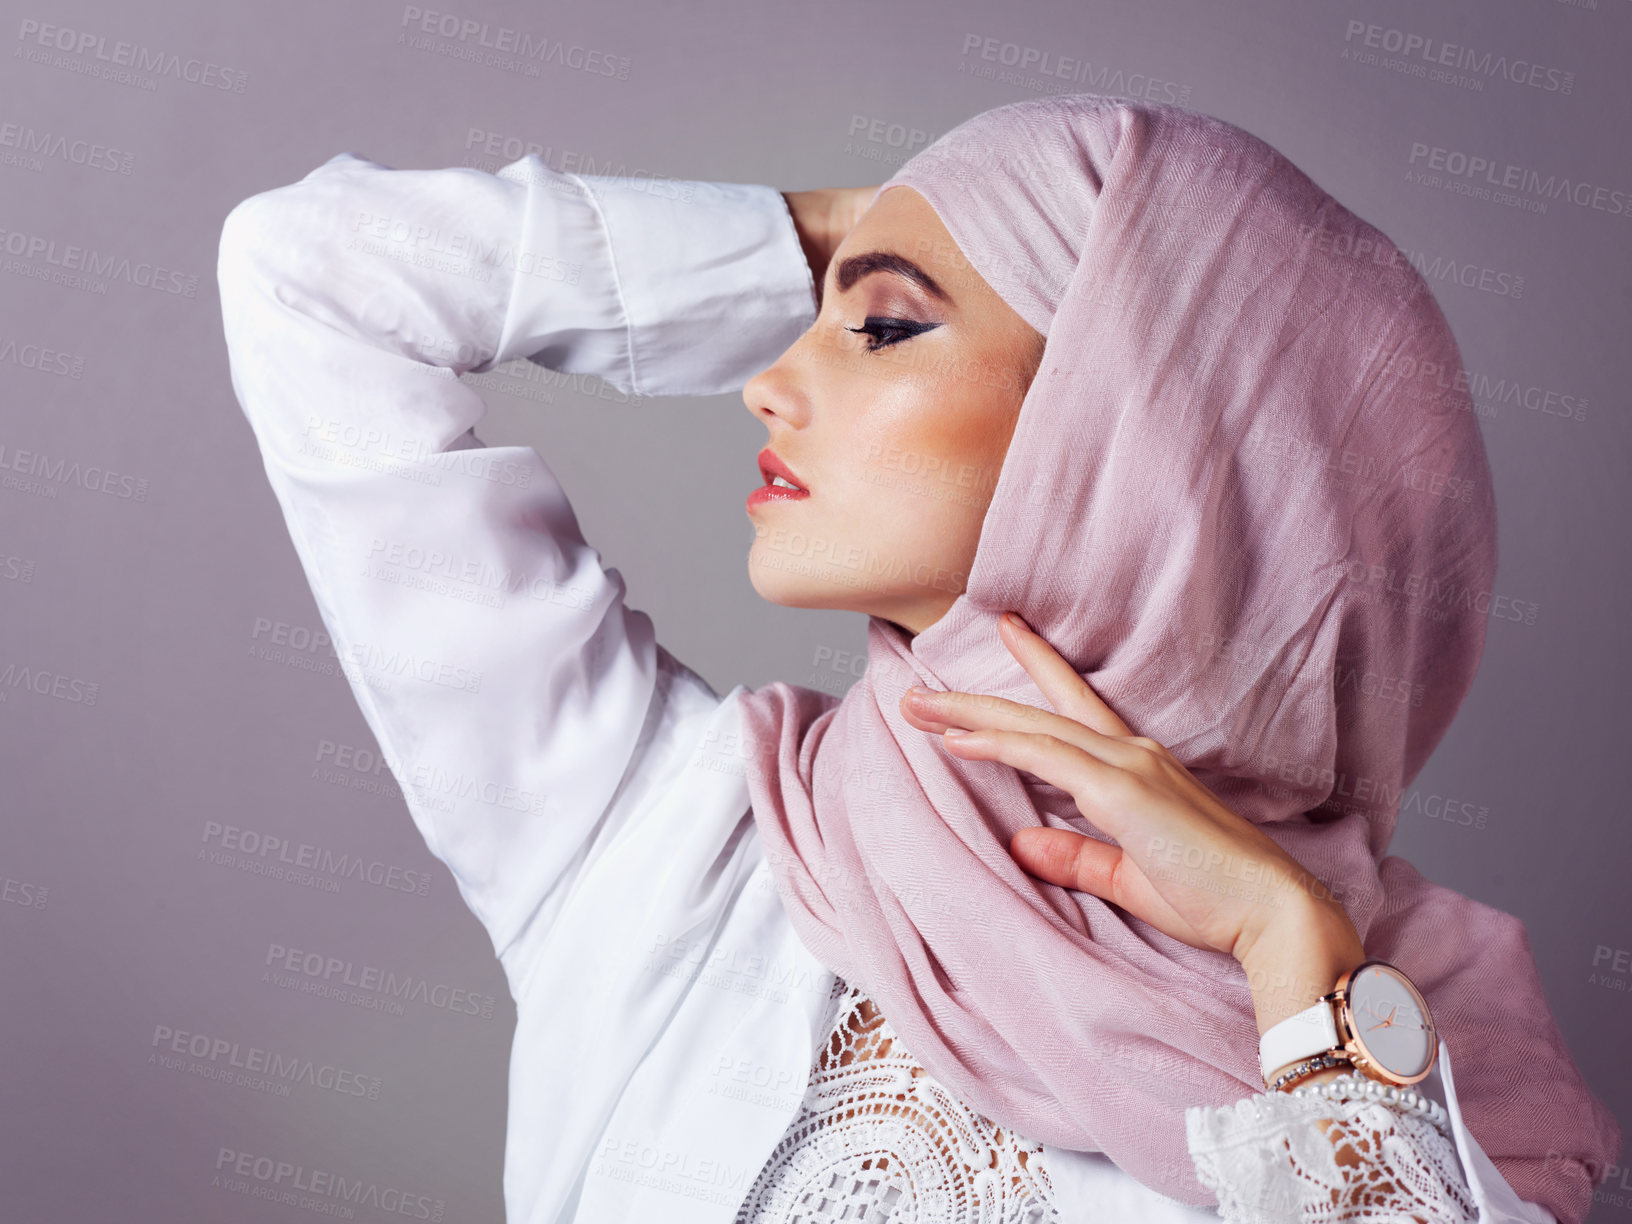 Buy stock photo Studio shot of a confident young woman wearing a colorful head scarf while posing against a grey background